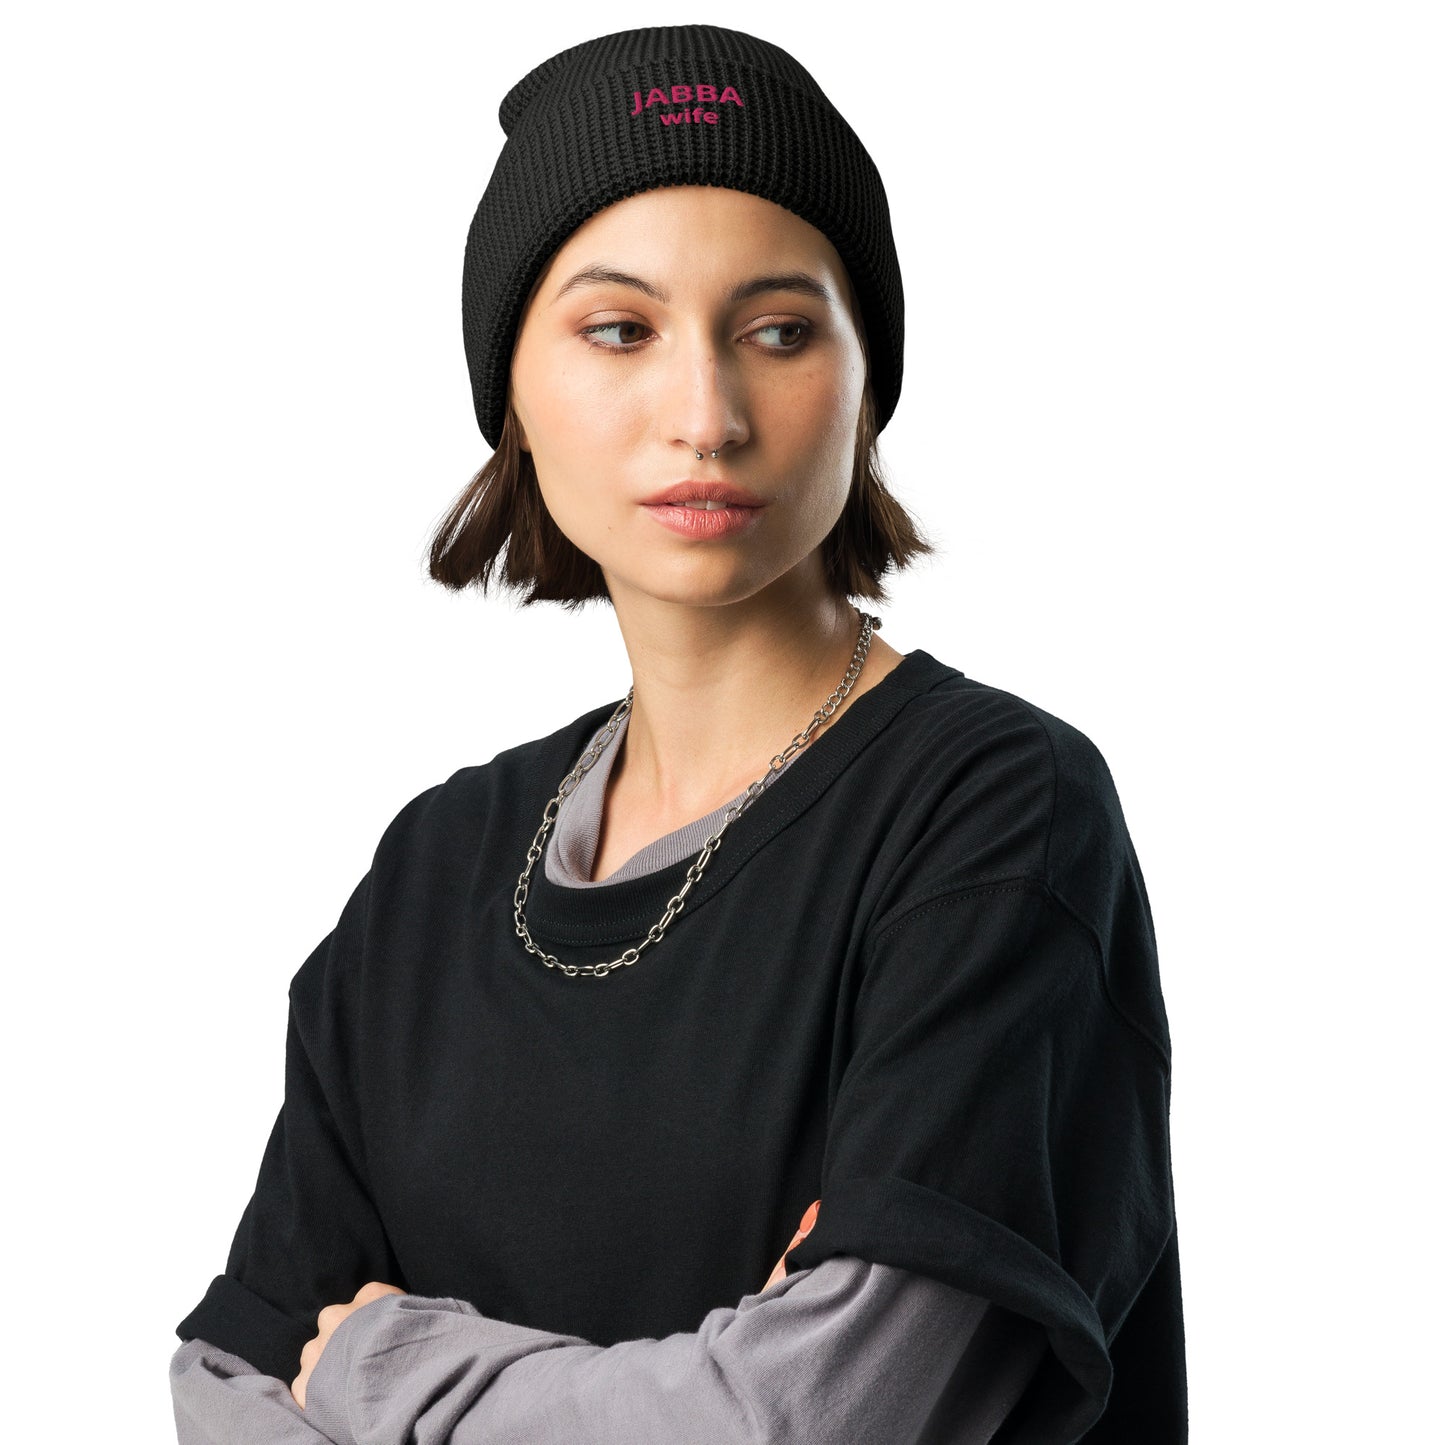 Keep warm and stylish with our JABBA Wife- waffle beanie - the perfect winter accessory for any outdoor adventure!